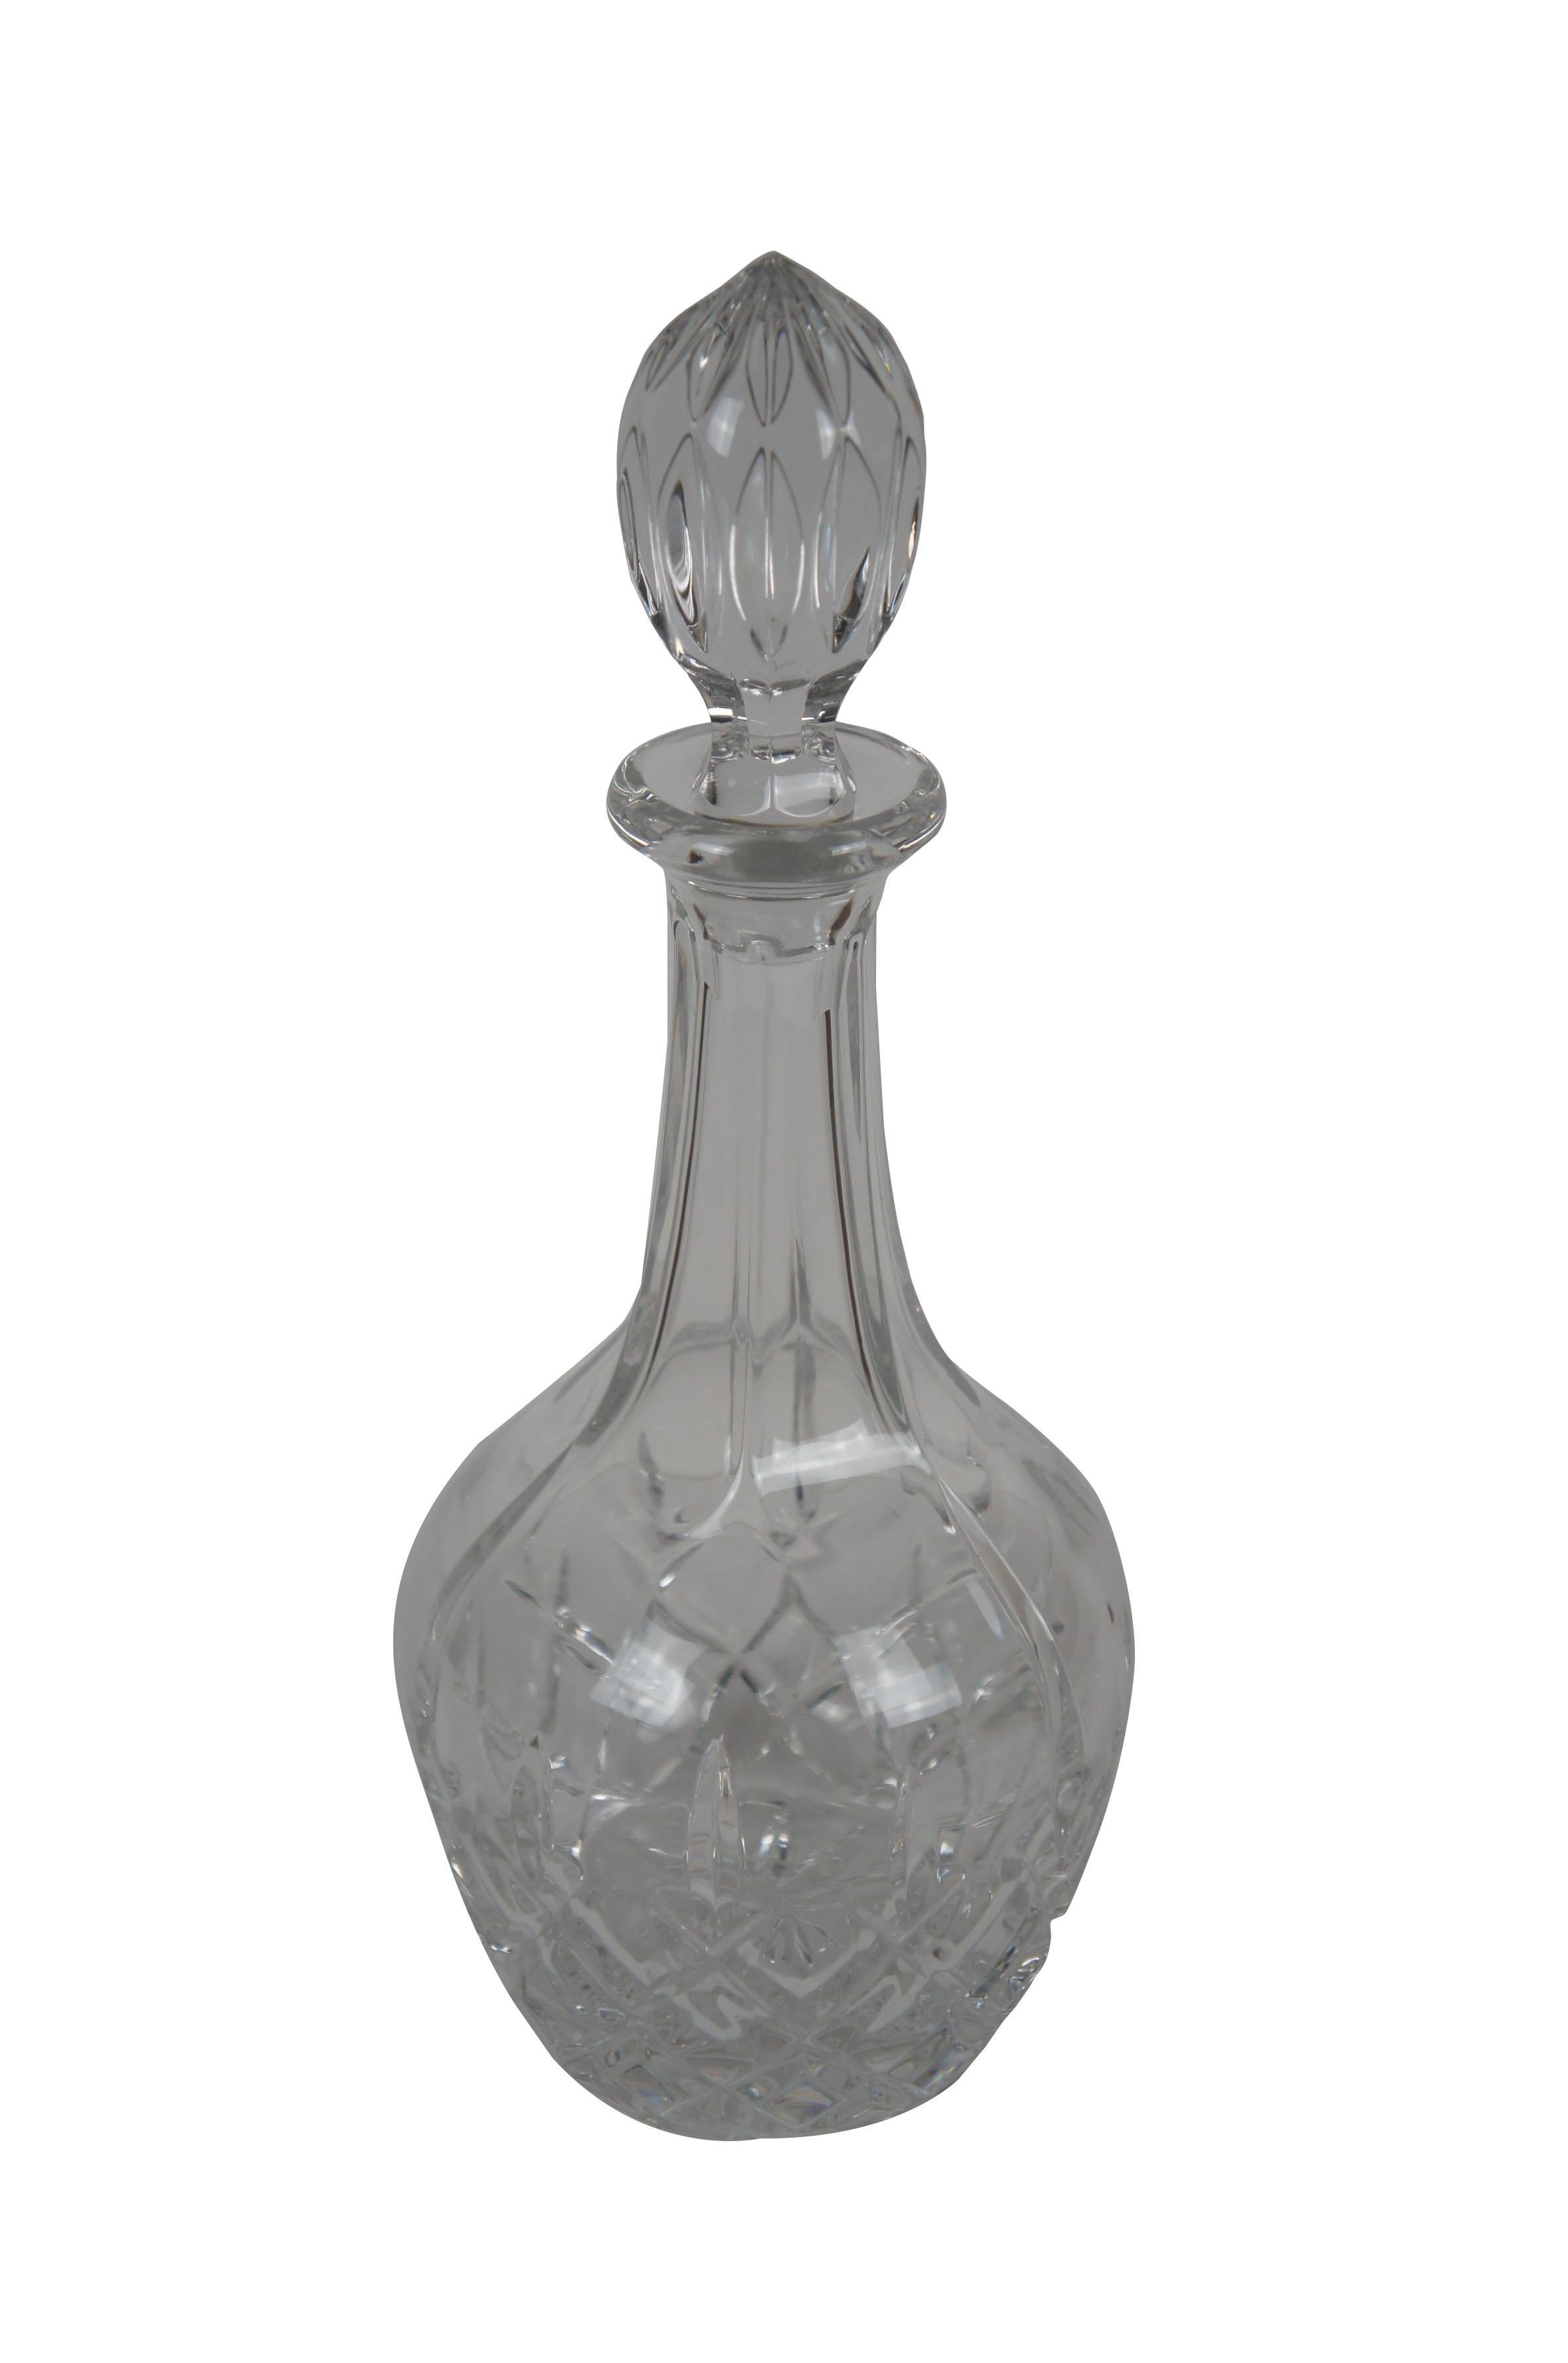 Late 20th century Gorham King Edward style cut crystal wine decanter. Balloon shaped bottle and fluted egg shaped stopper.

Dimensions:
5.25